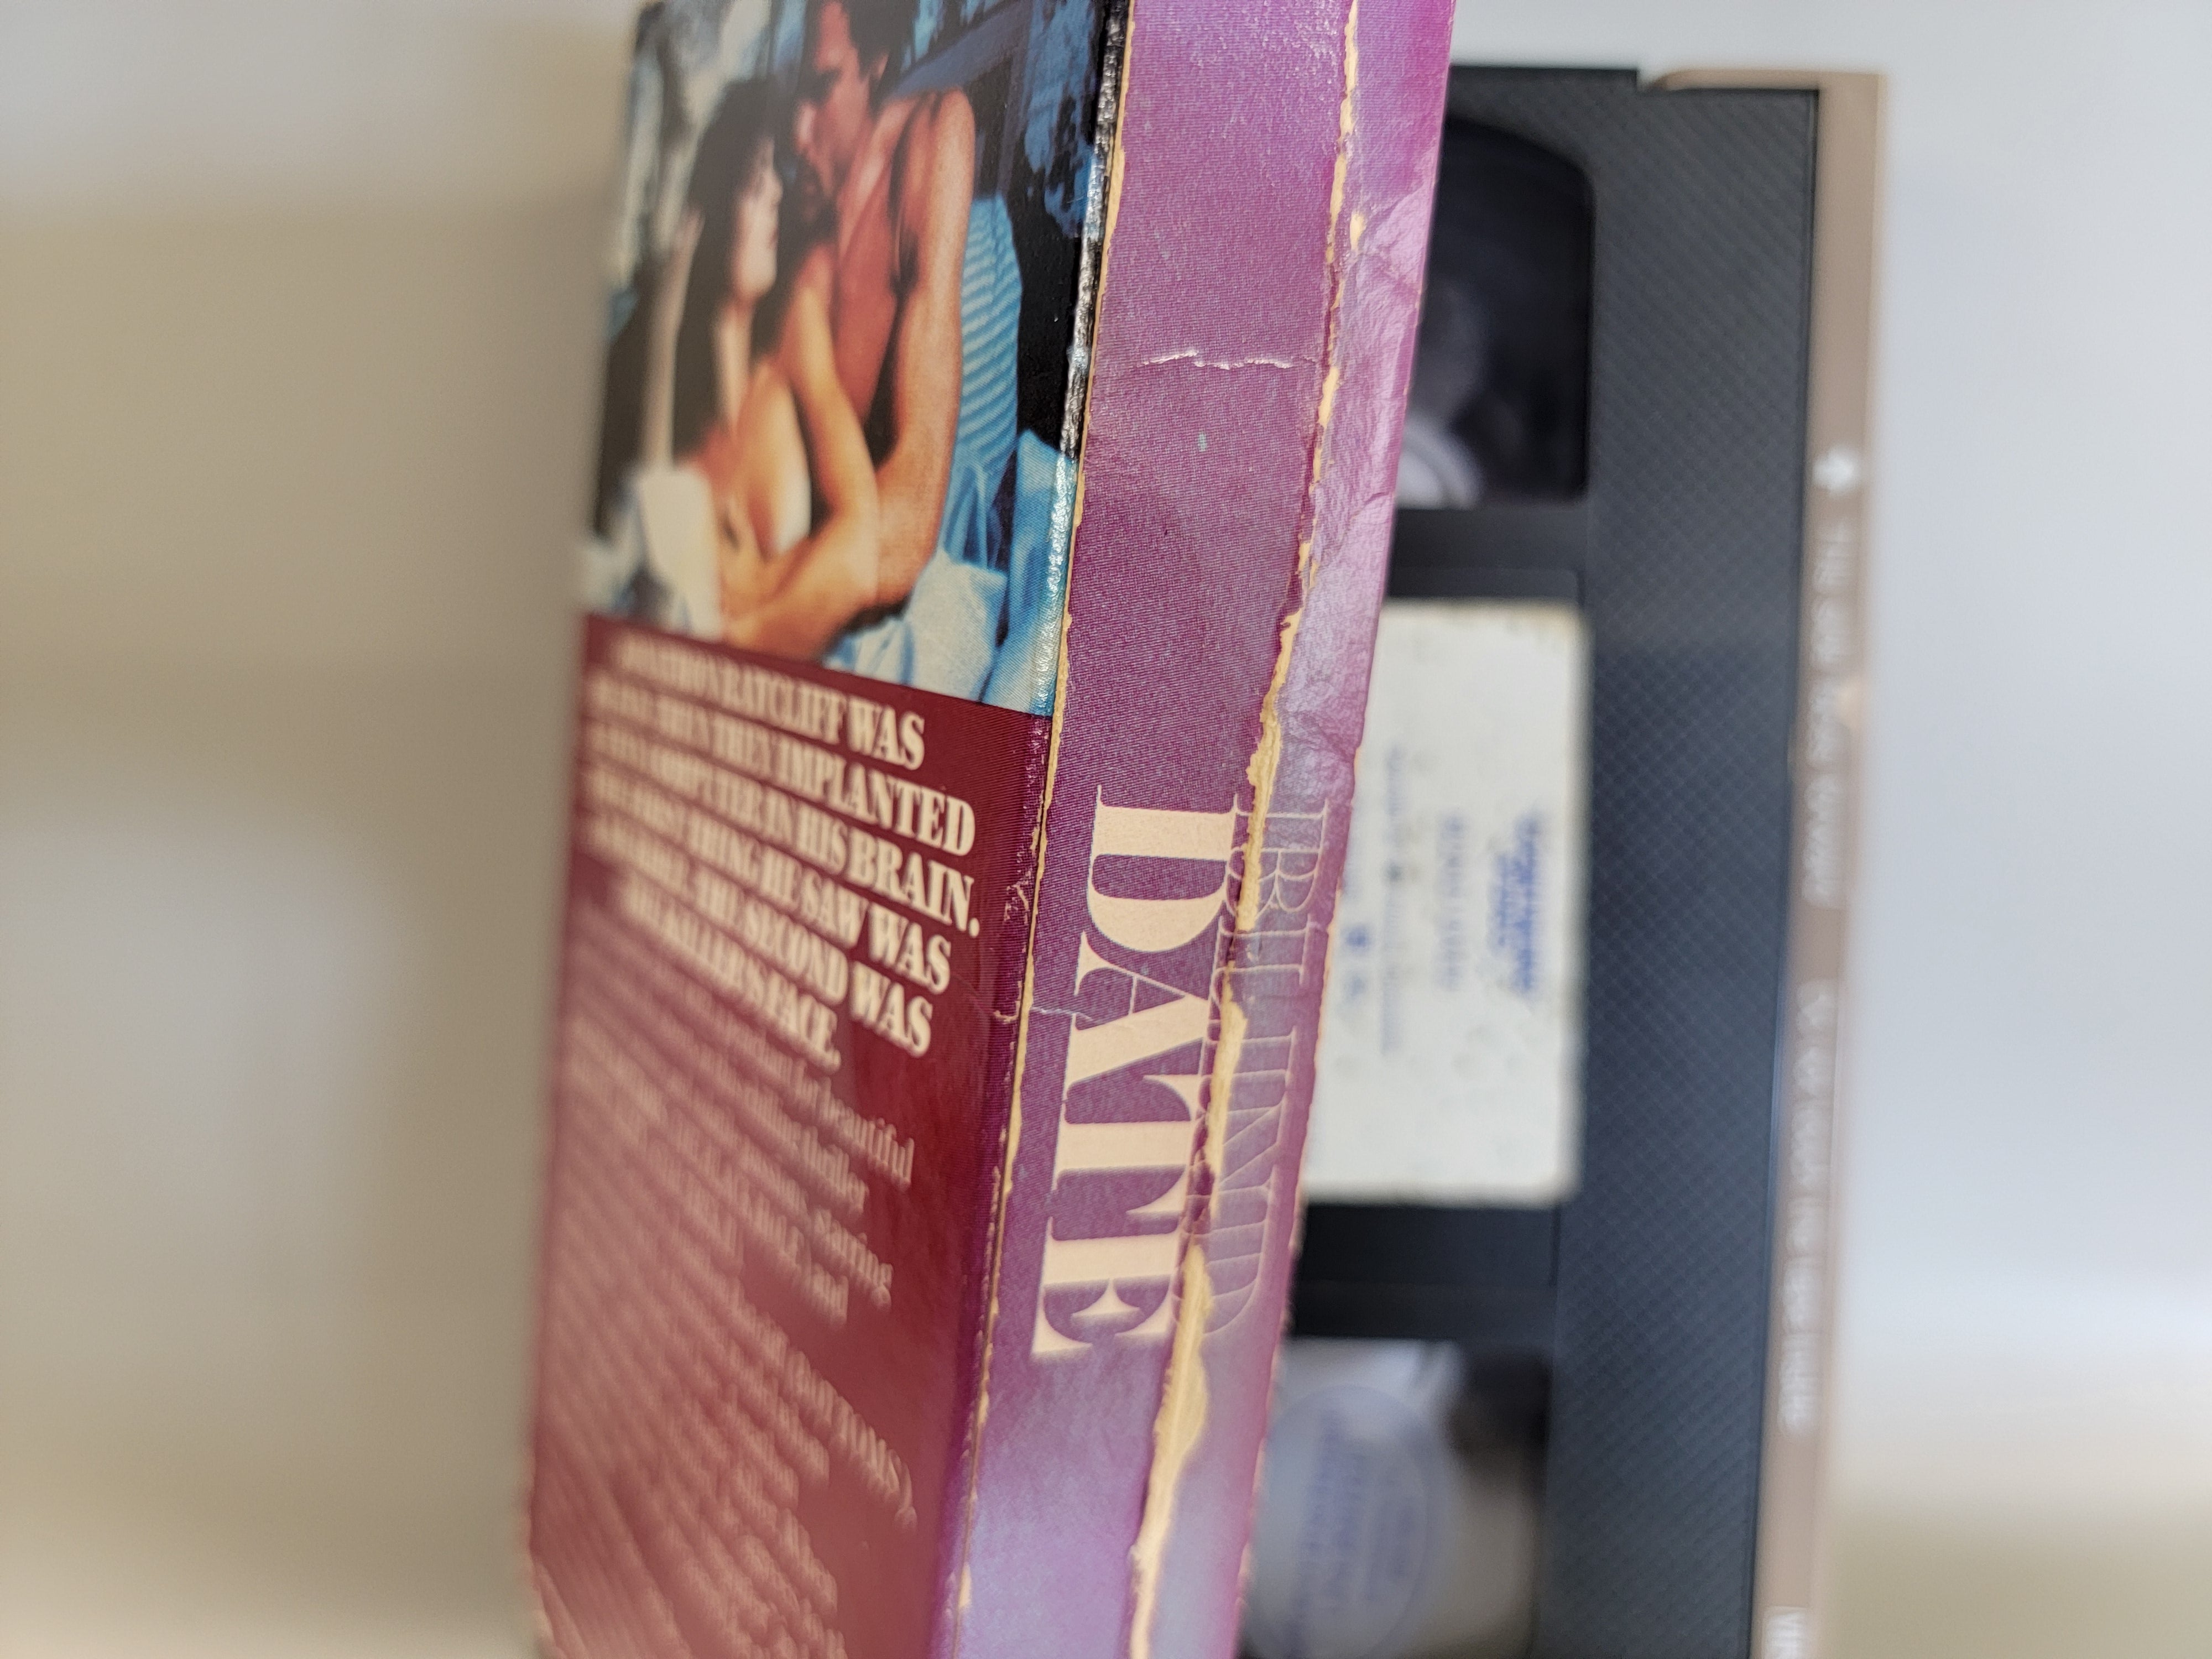 BLIND DATE VHS [USED]